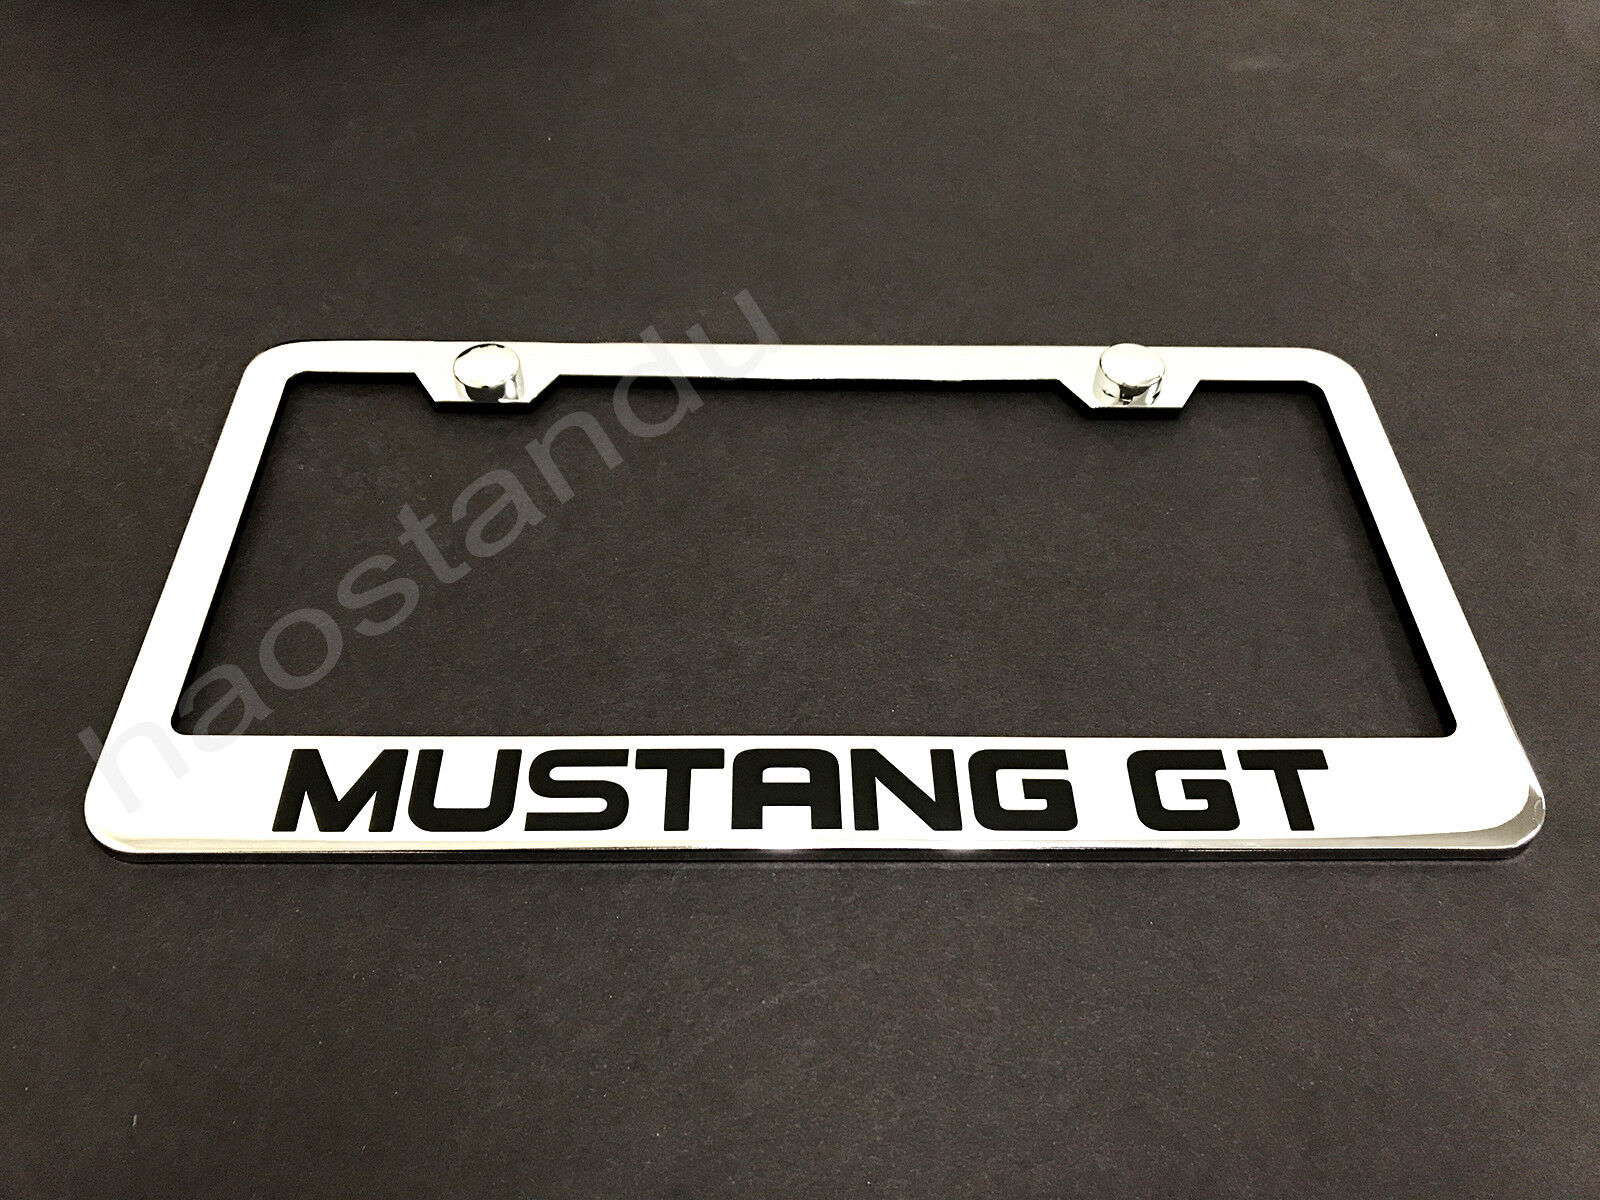 1xMustang GT STAINLESS STEEL LICENSE PLATE FRAME + Screw Caps